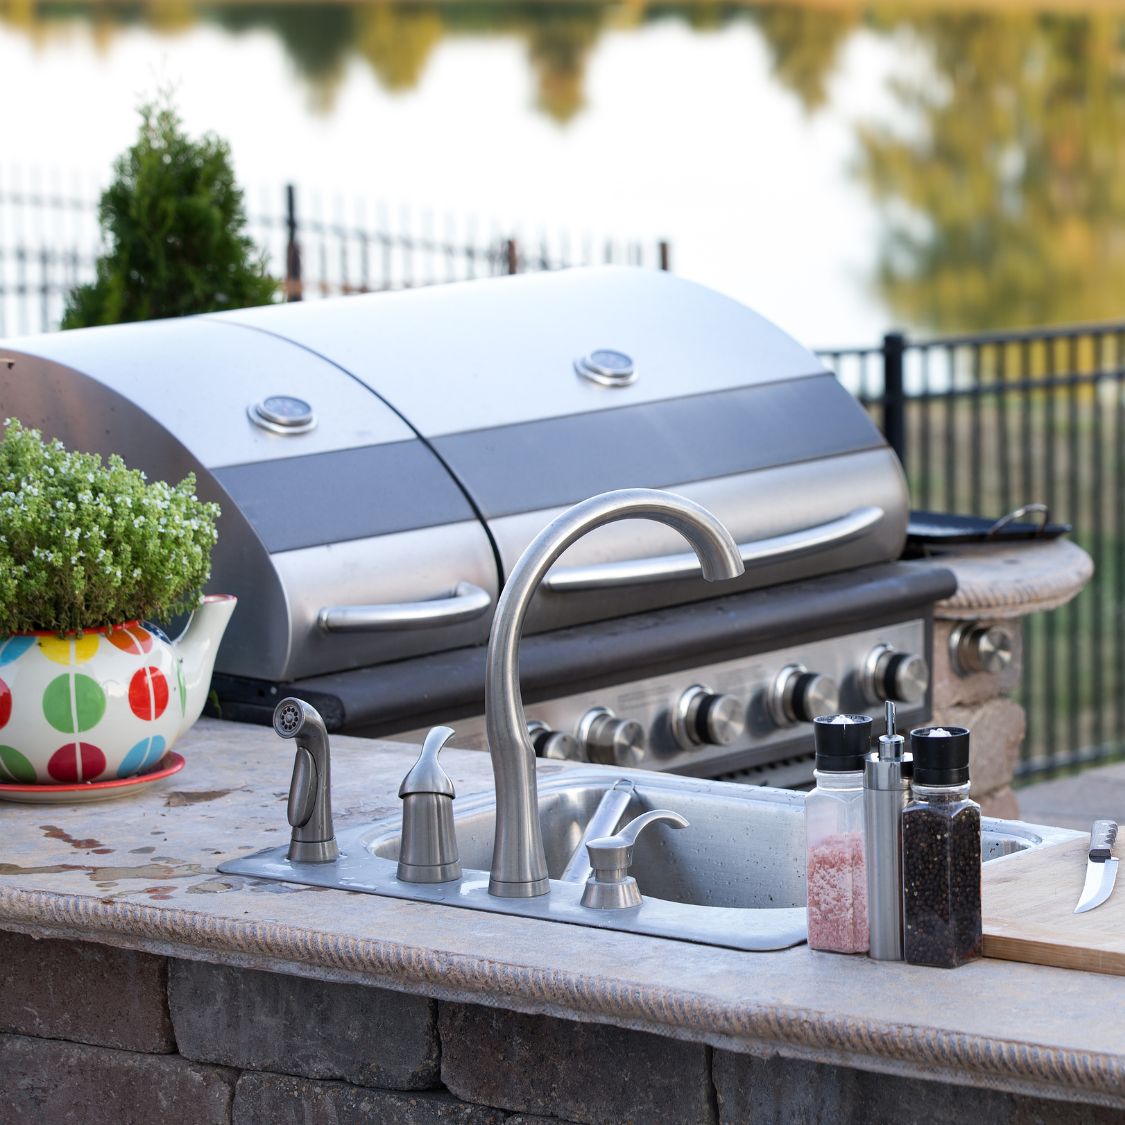 Tips To Get Your Outdoor Kitchen Ready for Spring